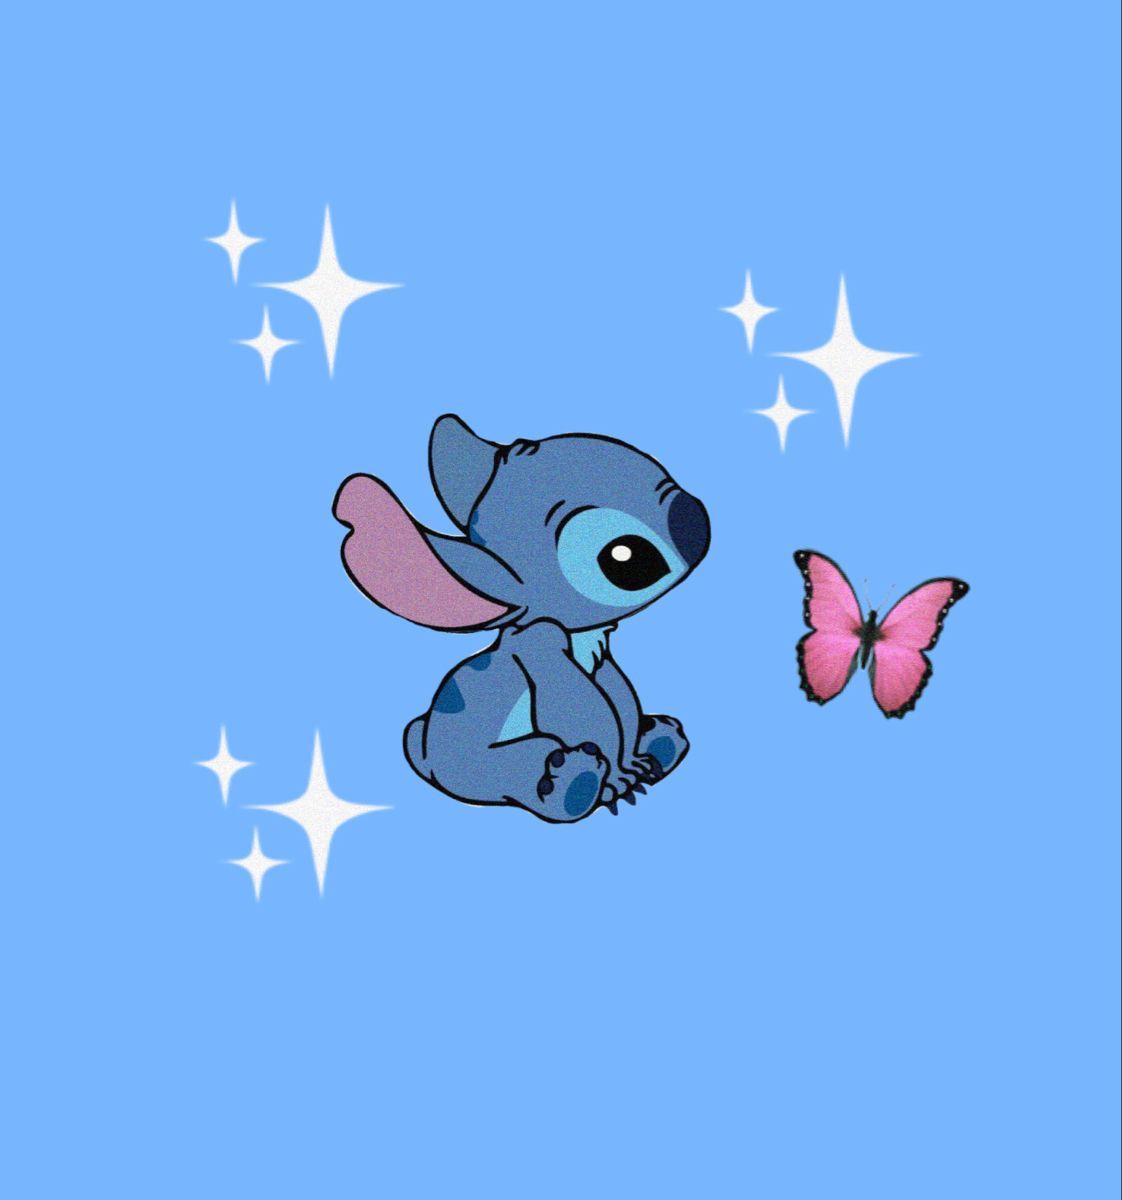 Aesthetic profile picture/ aesthetic wallpaper. Lilo and stitch drawings, Cartoon wallpaper iphone, Stitch drawing